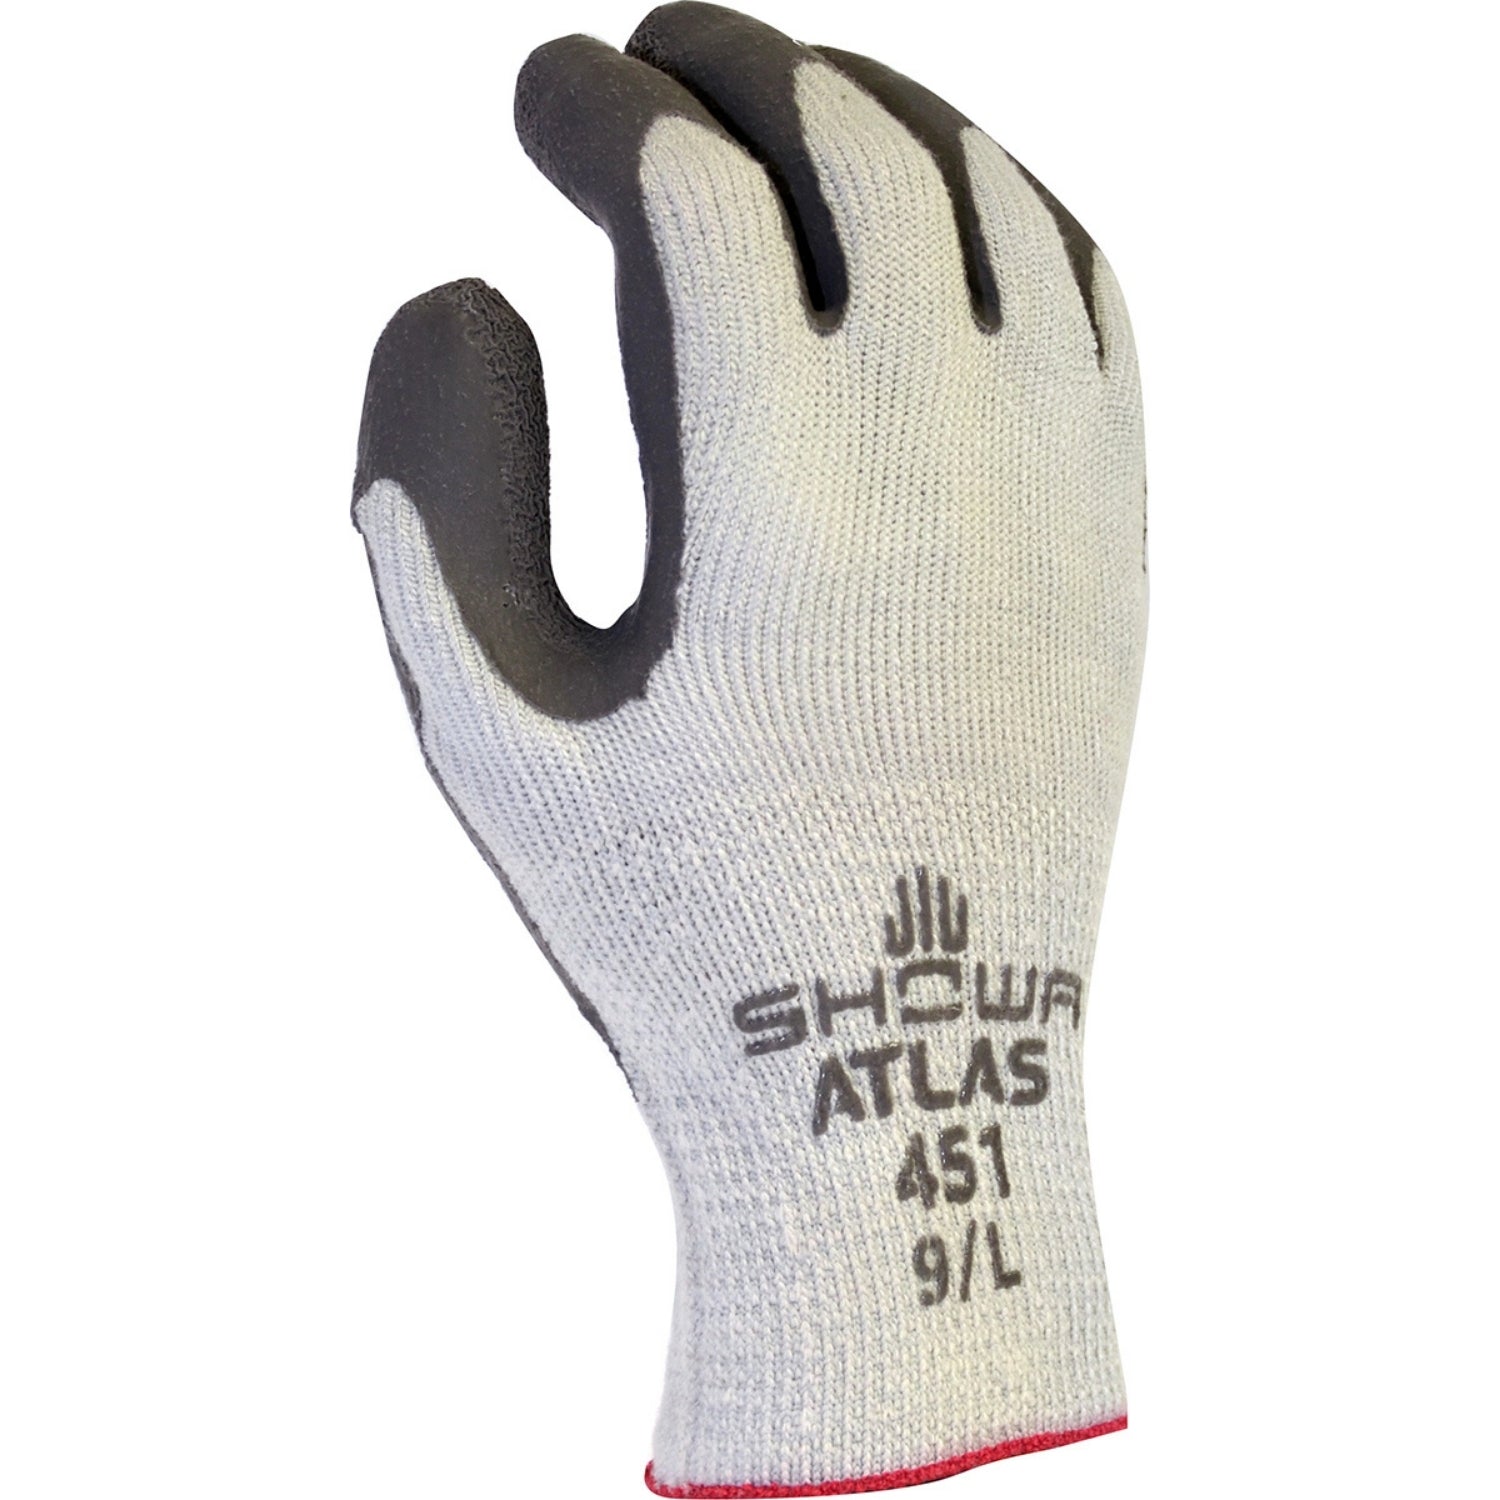 SHOWA 451 - Cold Weather Gloves